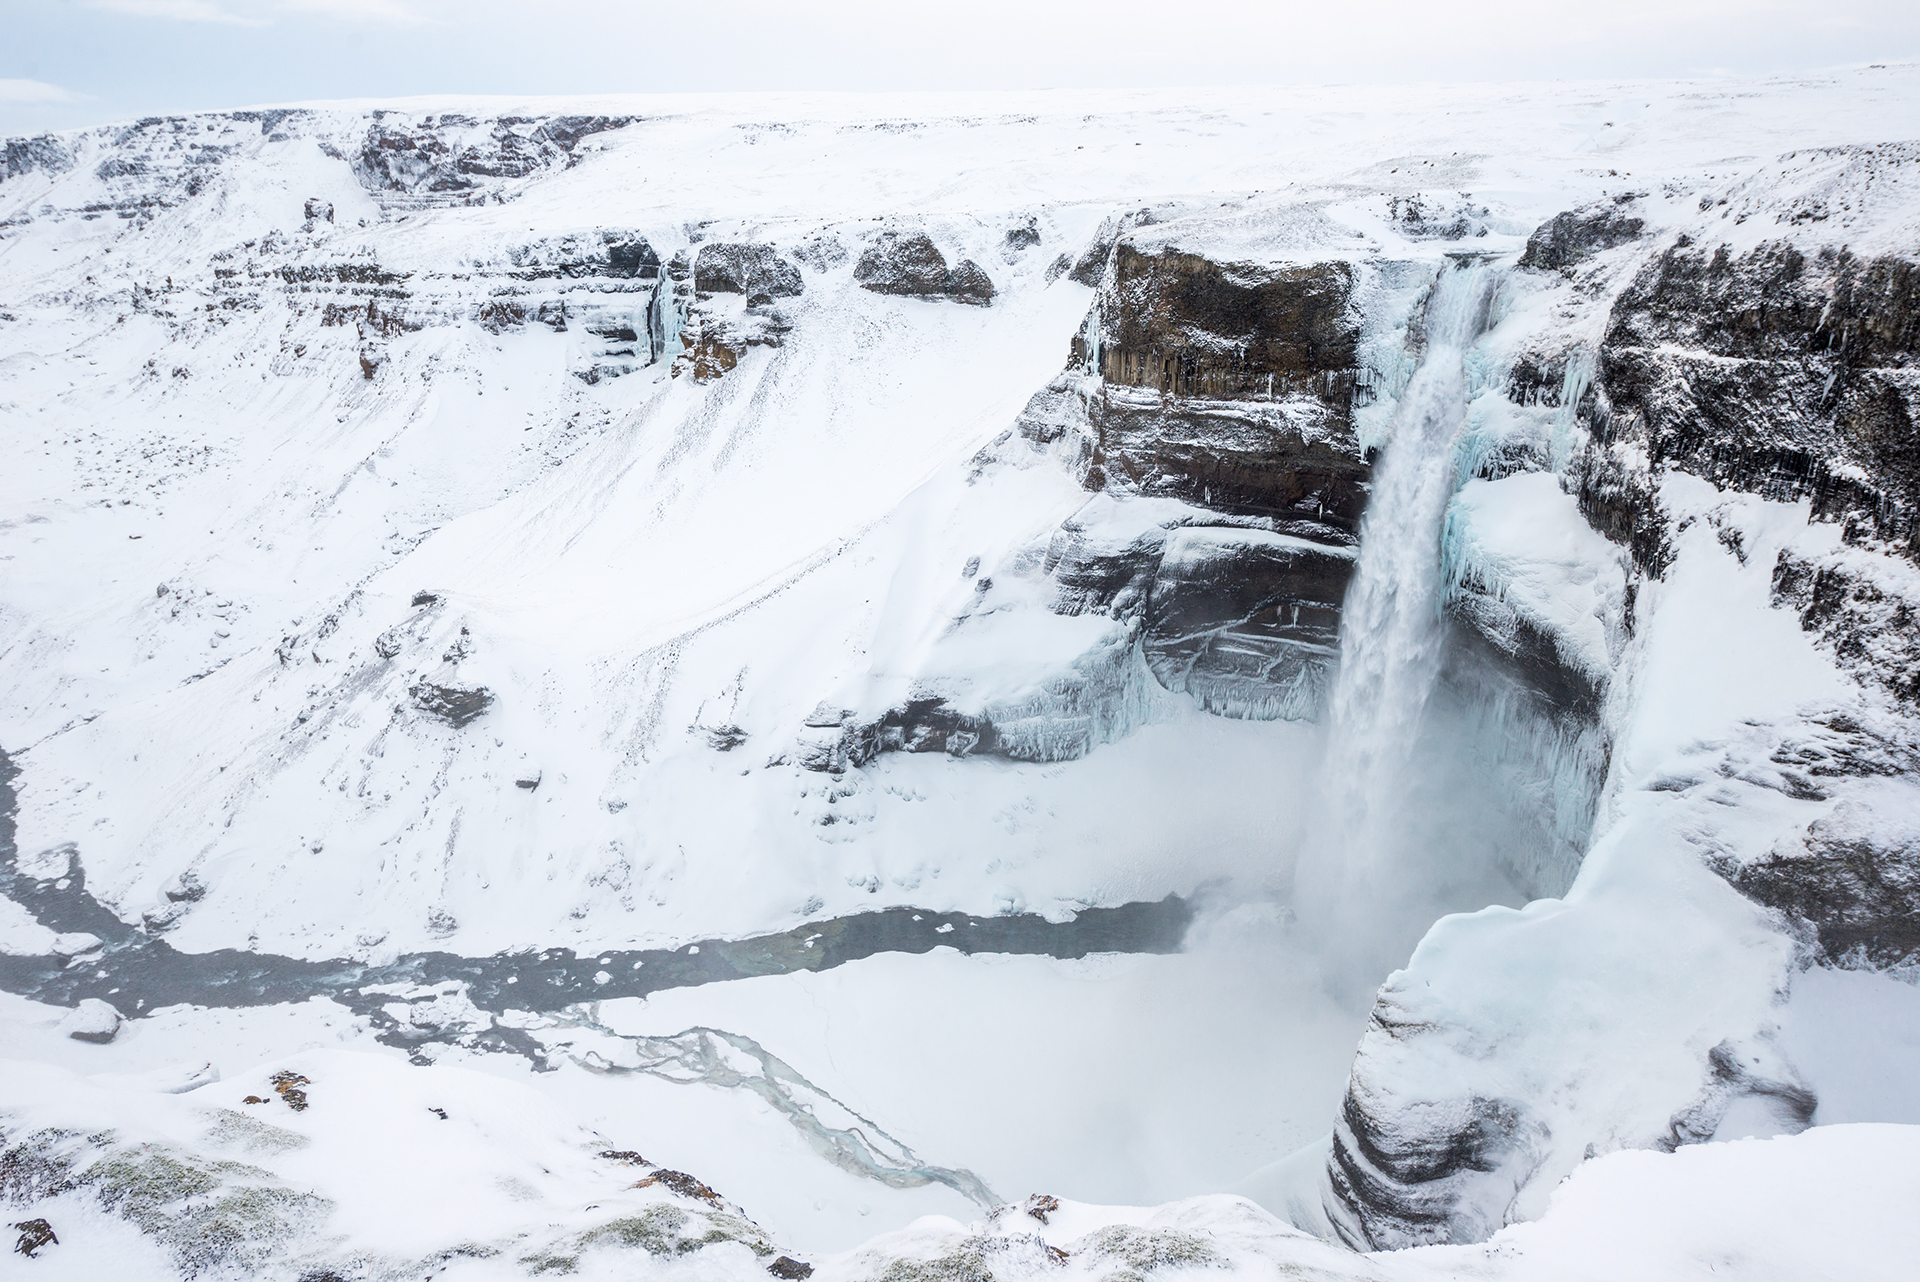 haifoss during the cold snowy winter icelandic days